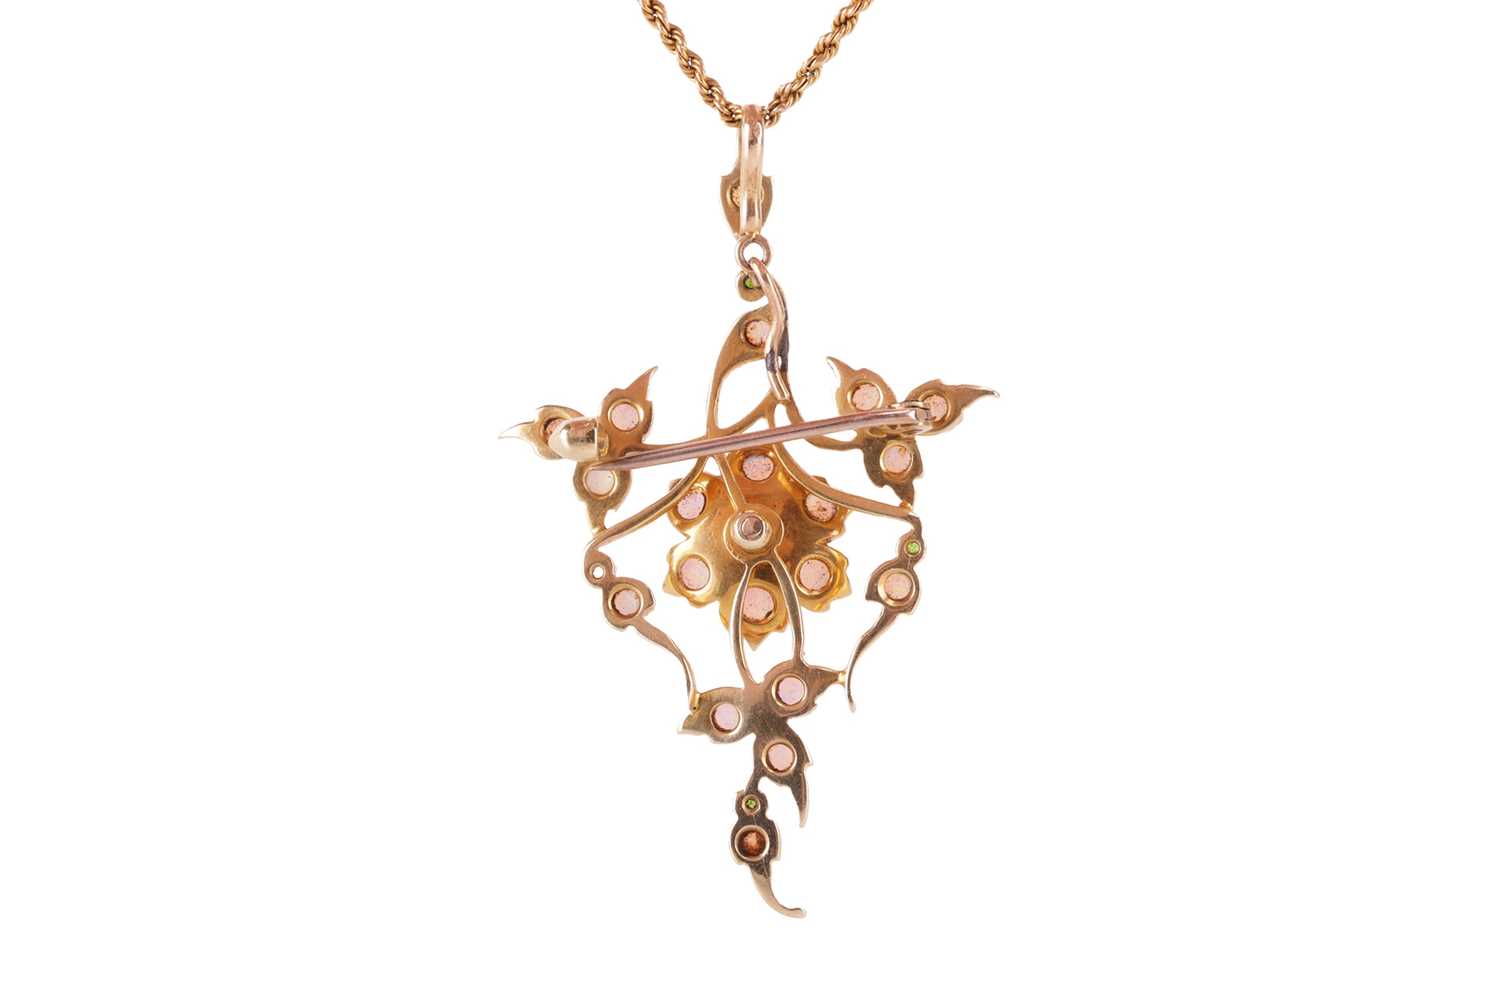 An opal-set floral brooch cum pendant on chain, the openwork mount centred with a flowerhead cluster - Image 3 of 3